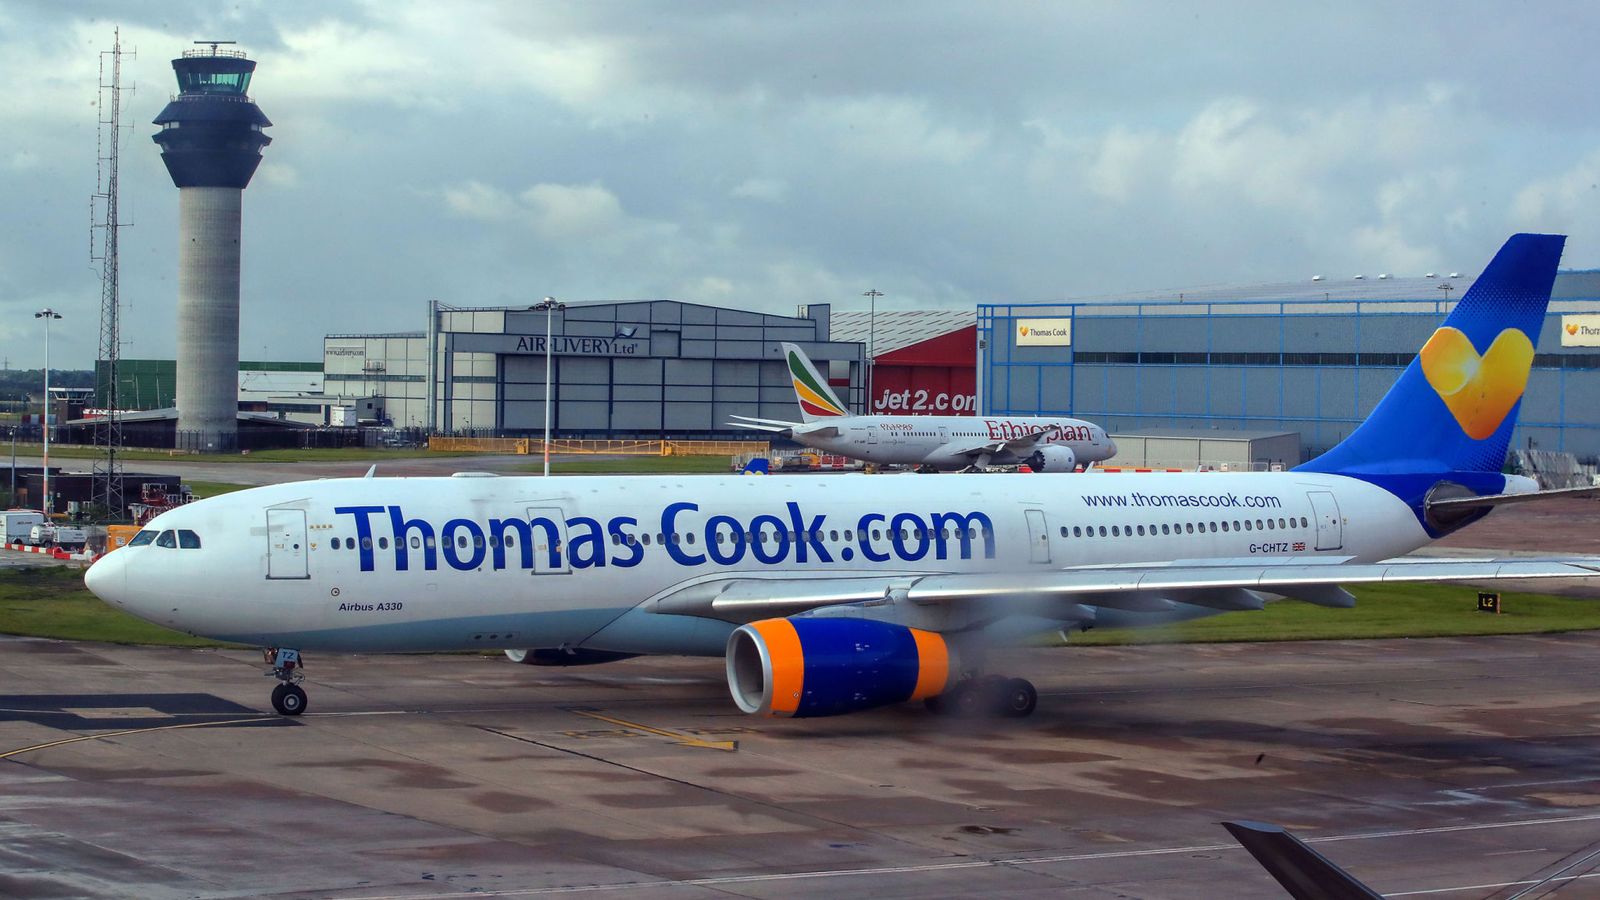 Ailing Thomas Cook in talks with UK government and investors for rescue deal